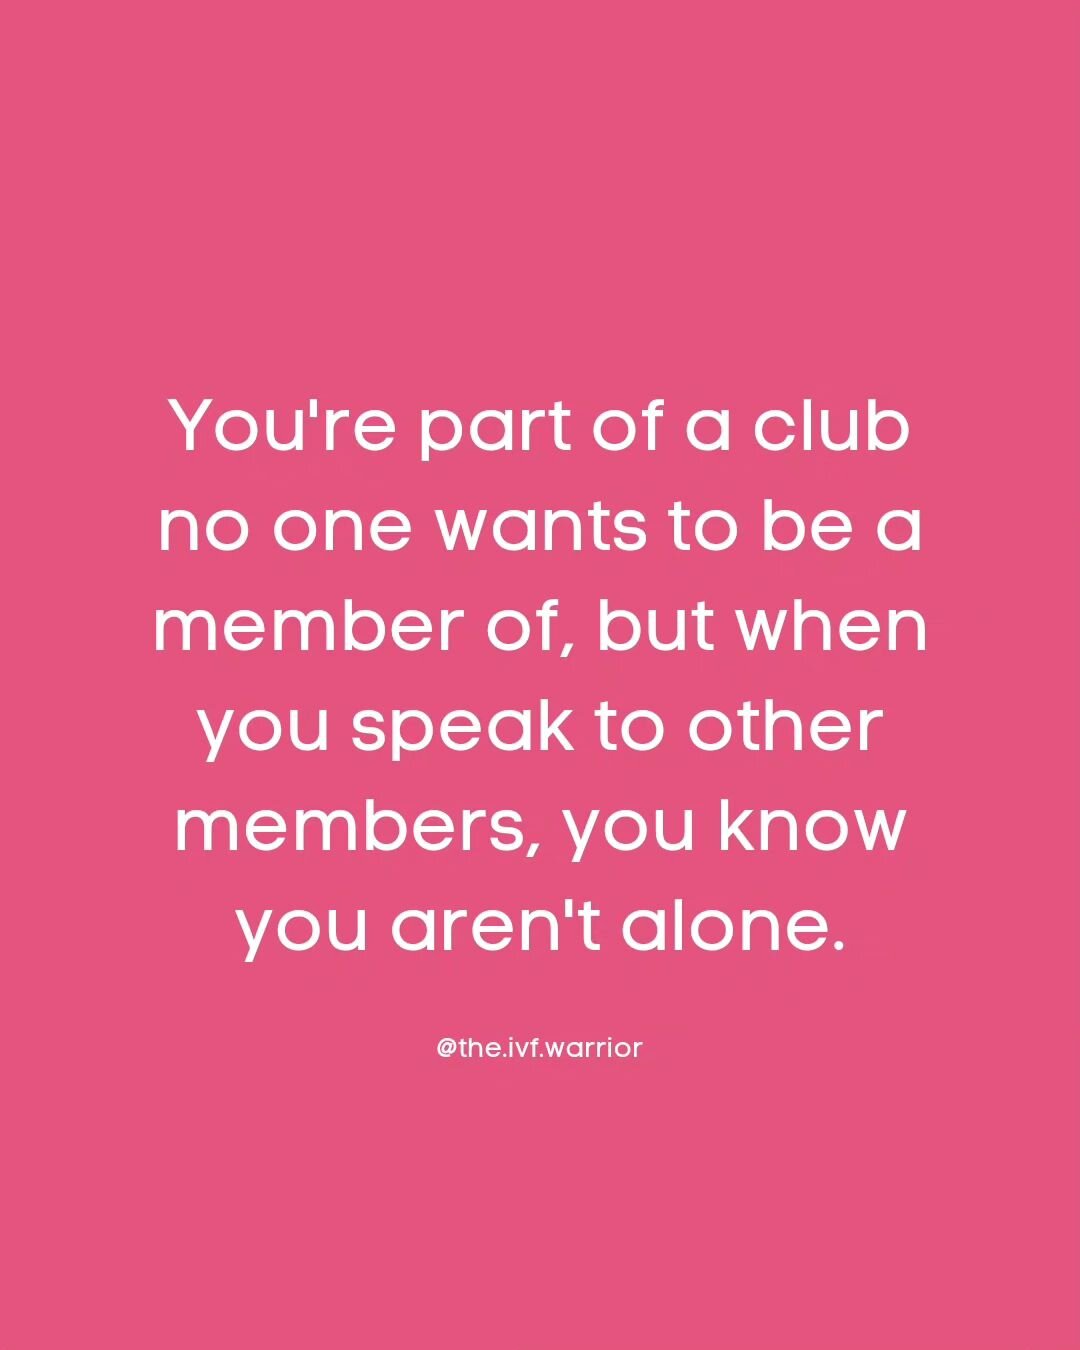 Worst club, best members ✨

Nearly 6 years ago, I started this community and haven't looked back. 

It's been such an honor getting to know so many of you. Cheering you on and providing some support, hope, and resources. 

Thank you for being here. I